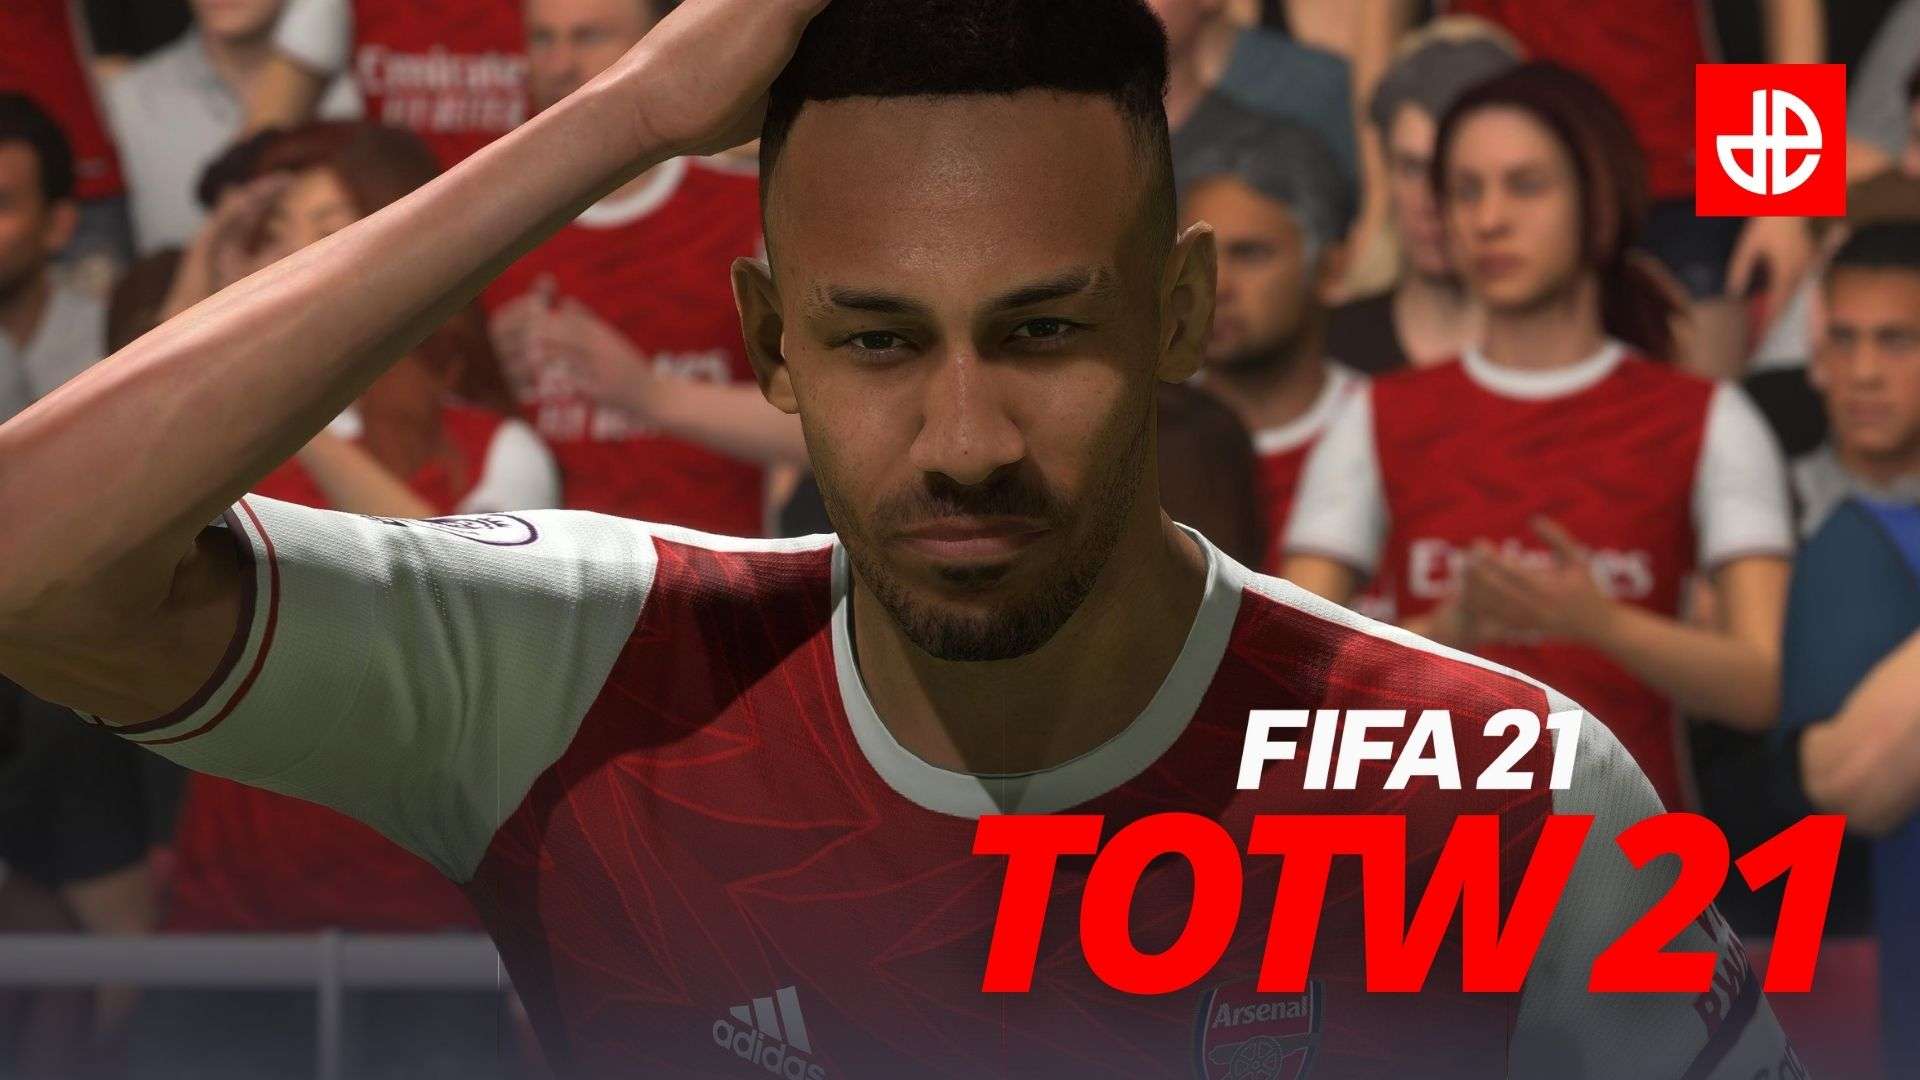 FIFA 21 Team of the Week TOTW 21 predictions, full team, and leaks.